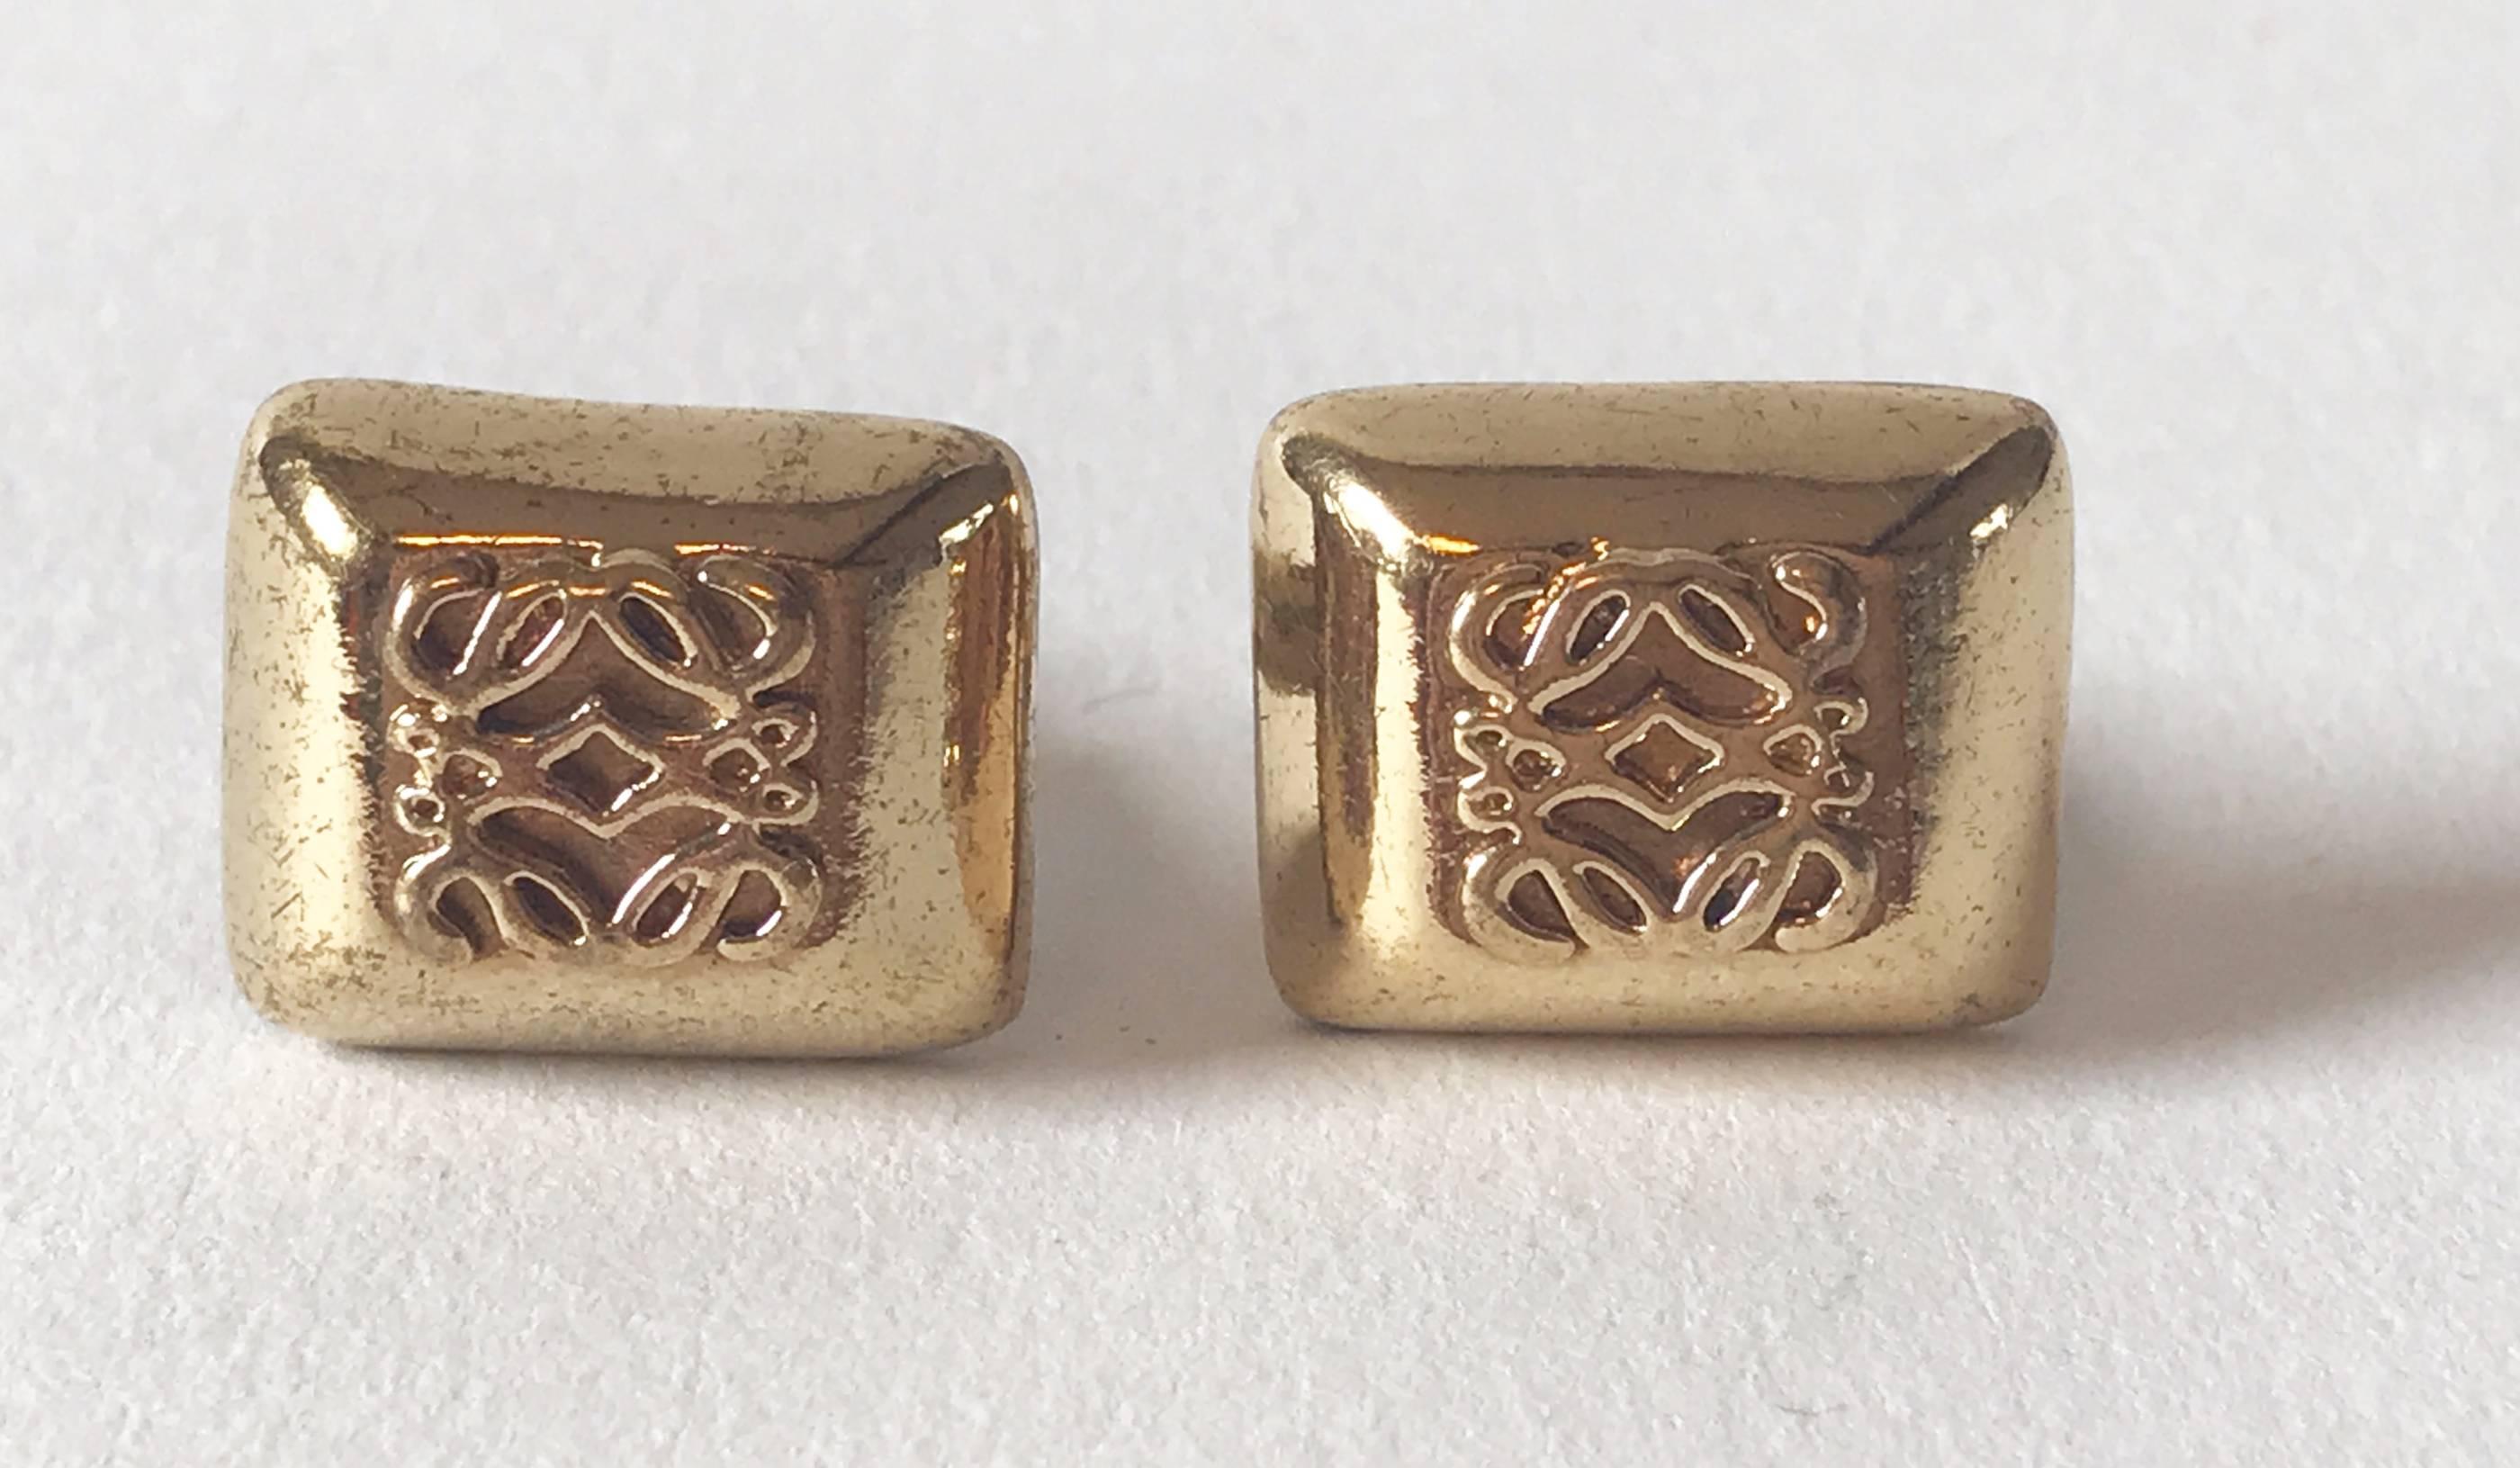 Cufflinks with the shape of truncate Pyramis crown with the Loewe logo filigree.

Dimensions:
L 1,90 cm X W 1,60 cm, Piramis depth is 0,75 cm including the pin open 2,75 cm
